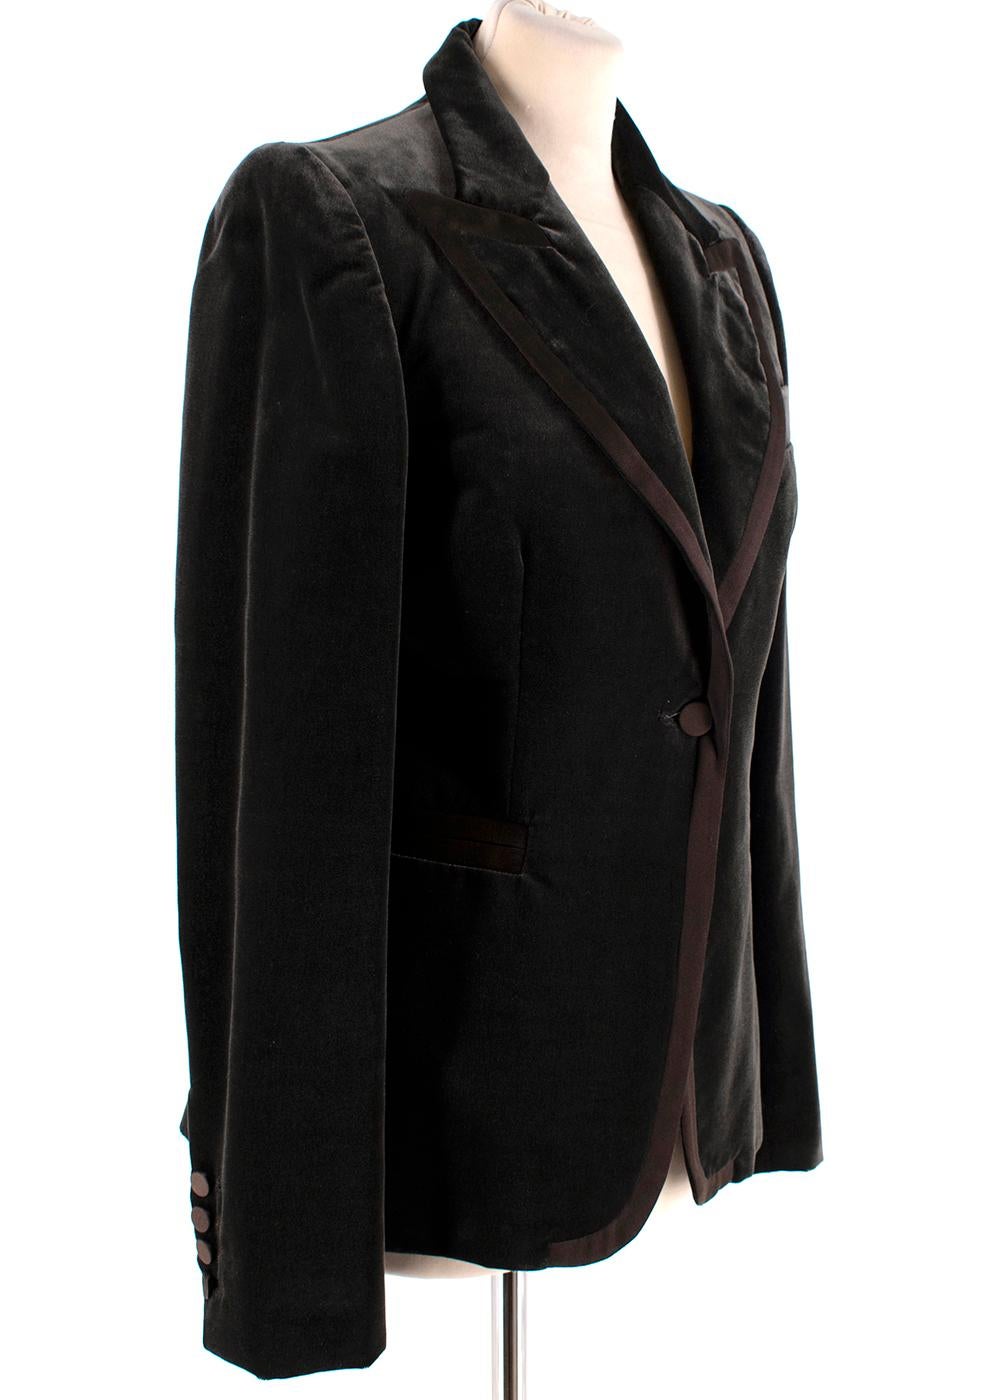 Gucci Green Velvet Two Piece Suit 

Blazer:
- Silk edged lapels 
- A single button fastening on front
- Internal pocket
- Single centre back vent
- Button fastening on cuffs 
- Sealed bound pockets on front

Trousers:
- Flared bottoms
- Silk edging